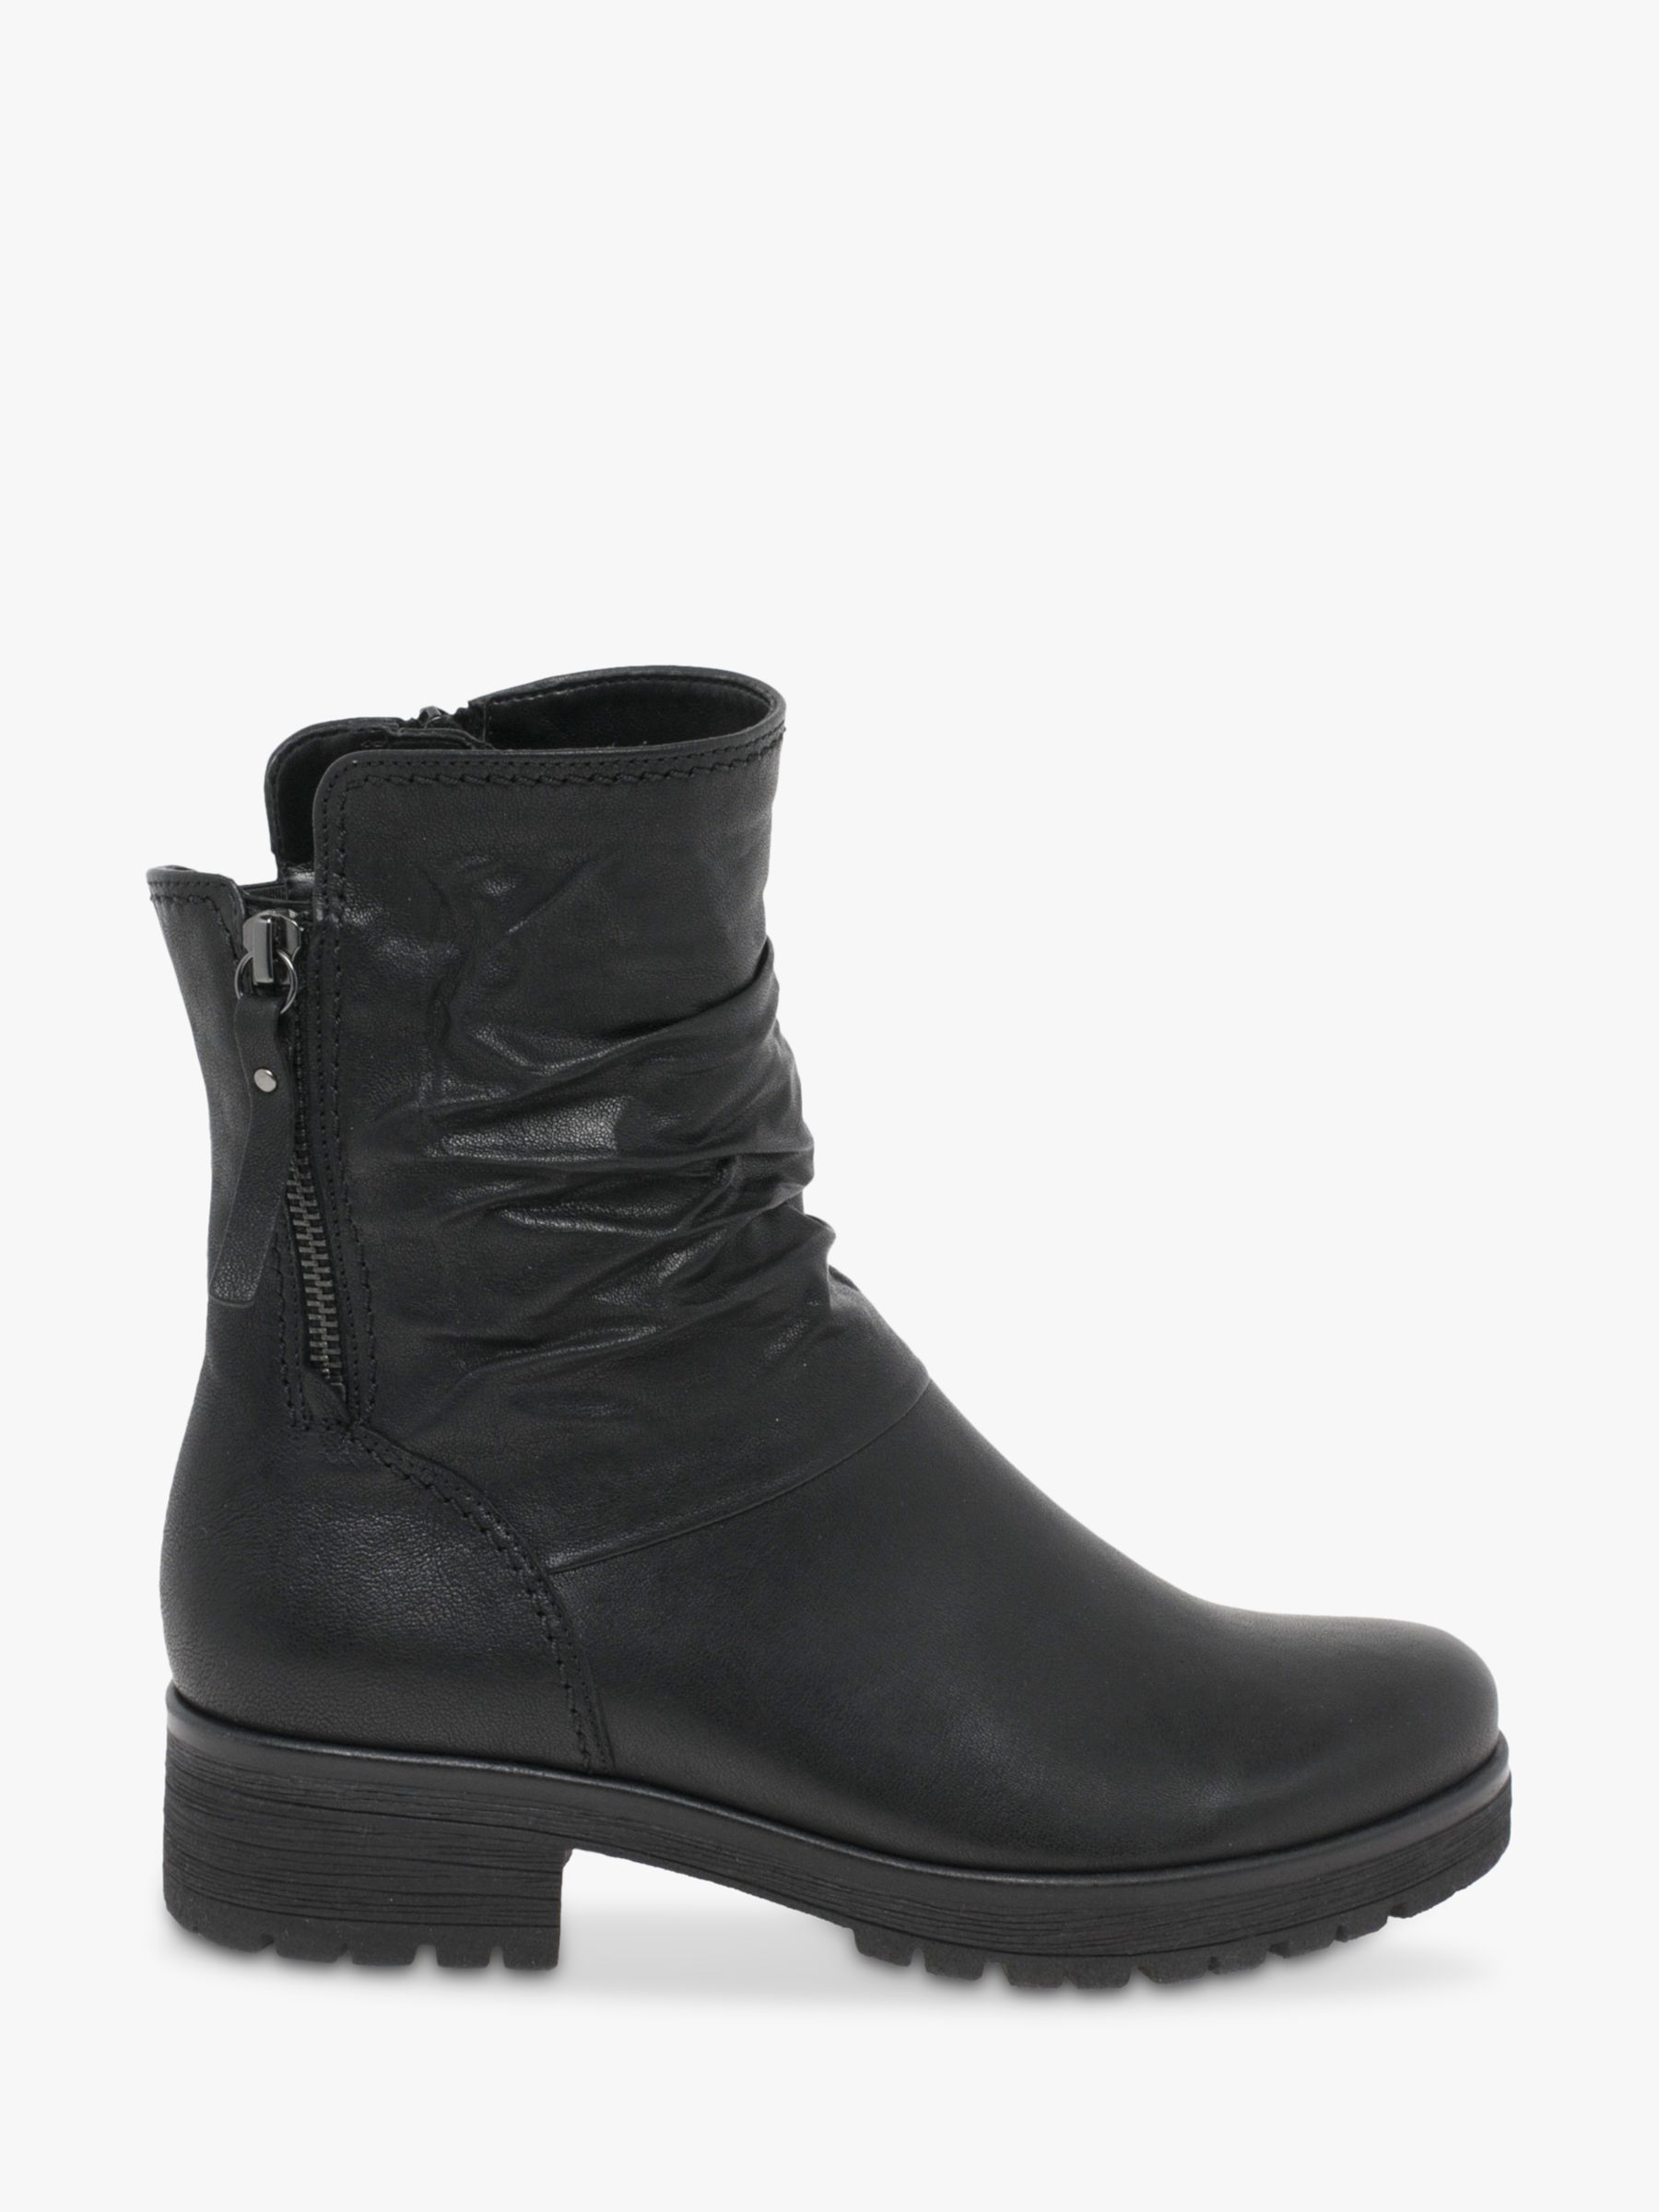 Gabor Zola Wide Fit Leather Biker Boots, Black at John Lewis Partners